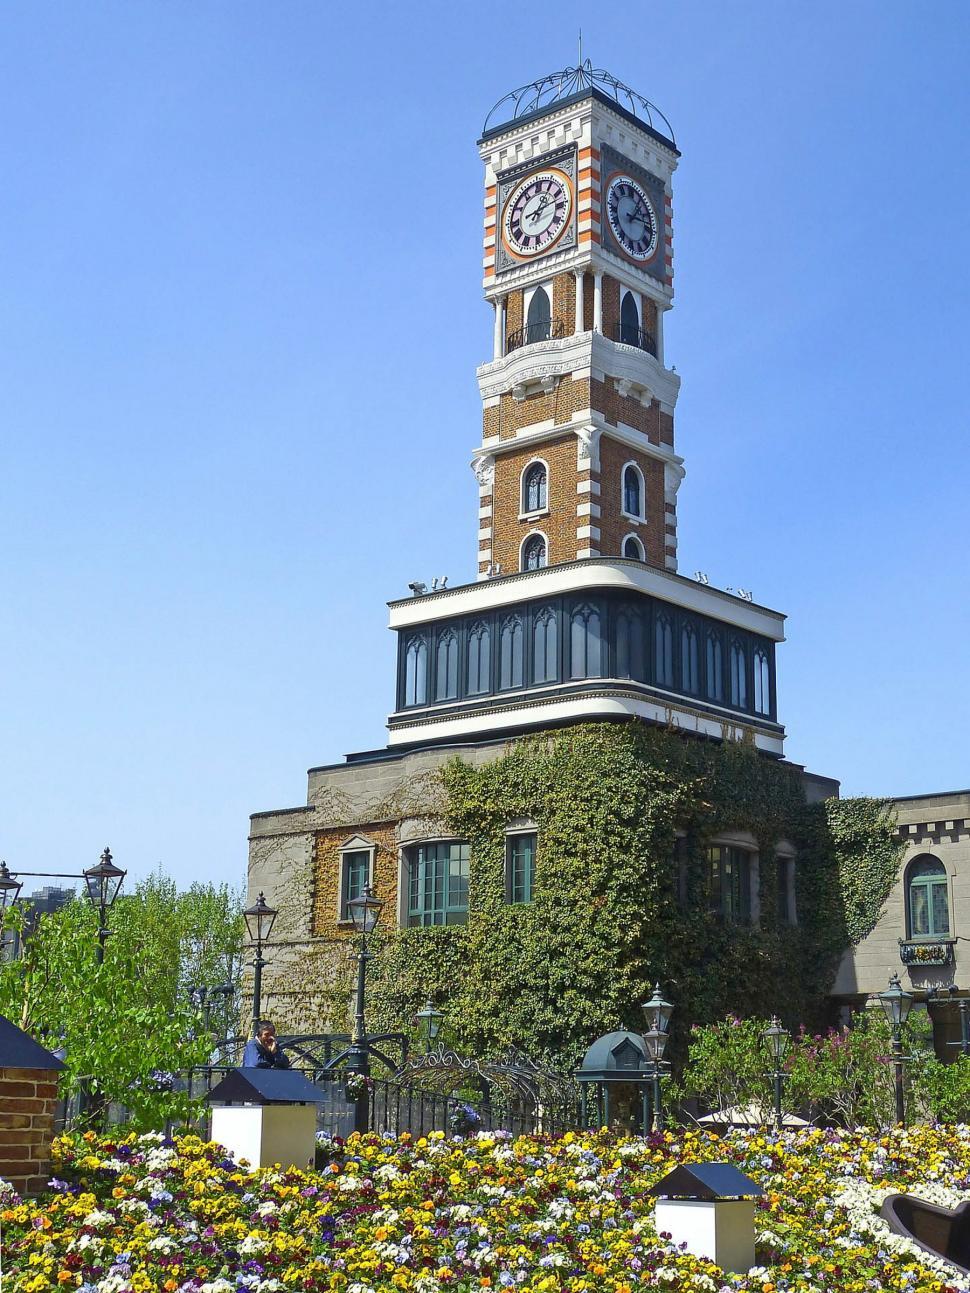 Free Image of Tower With Clock on Top 